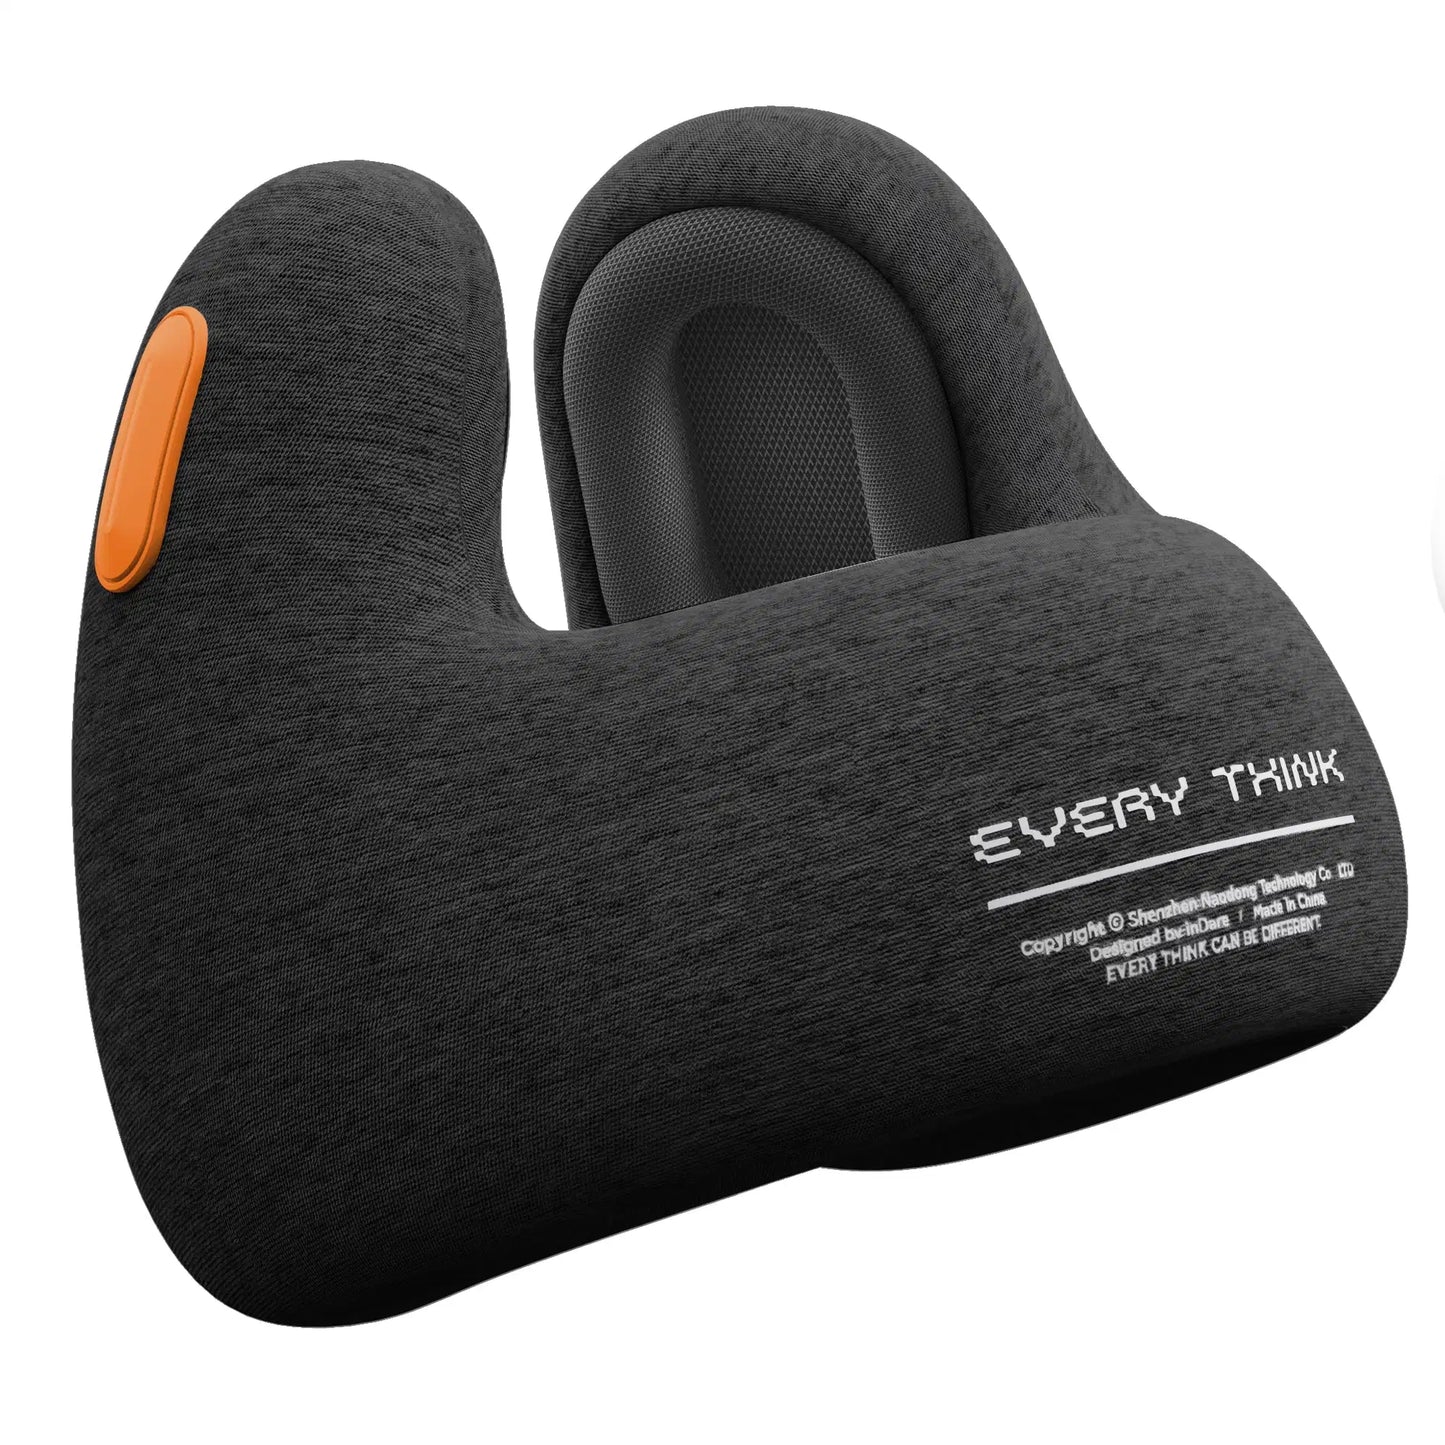 Noise-Cancelling Travel Pillow: Your Ticket to Tranquil Journeys